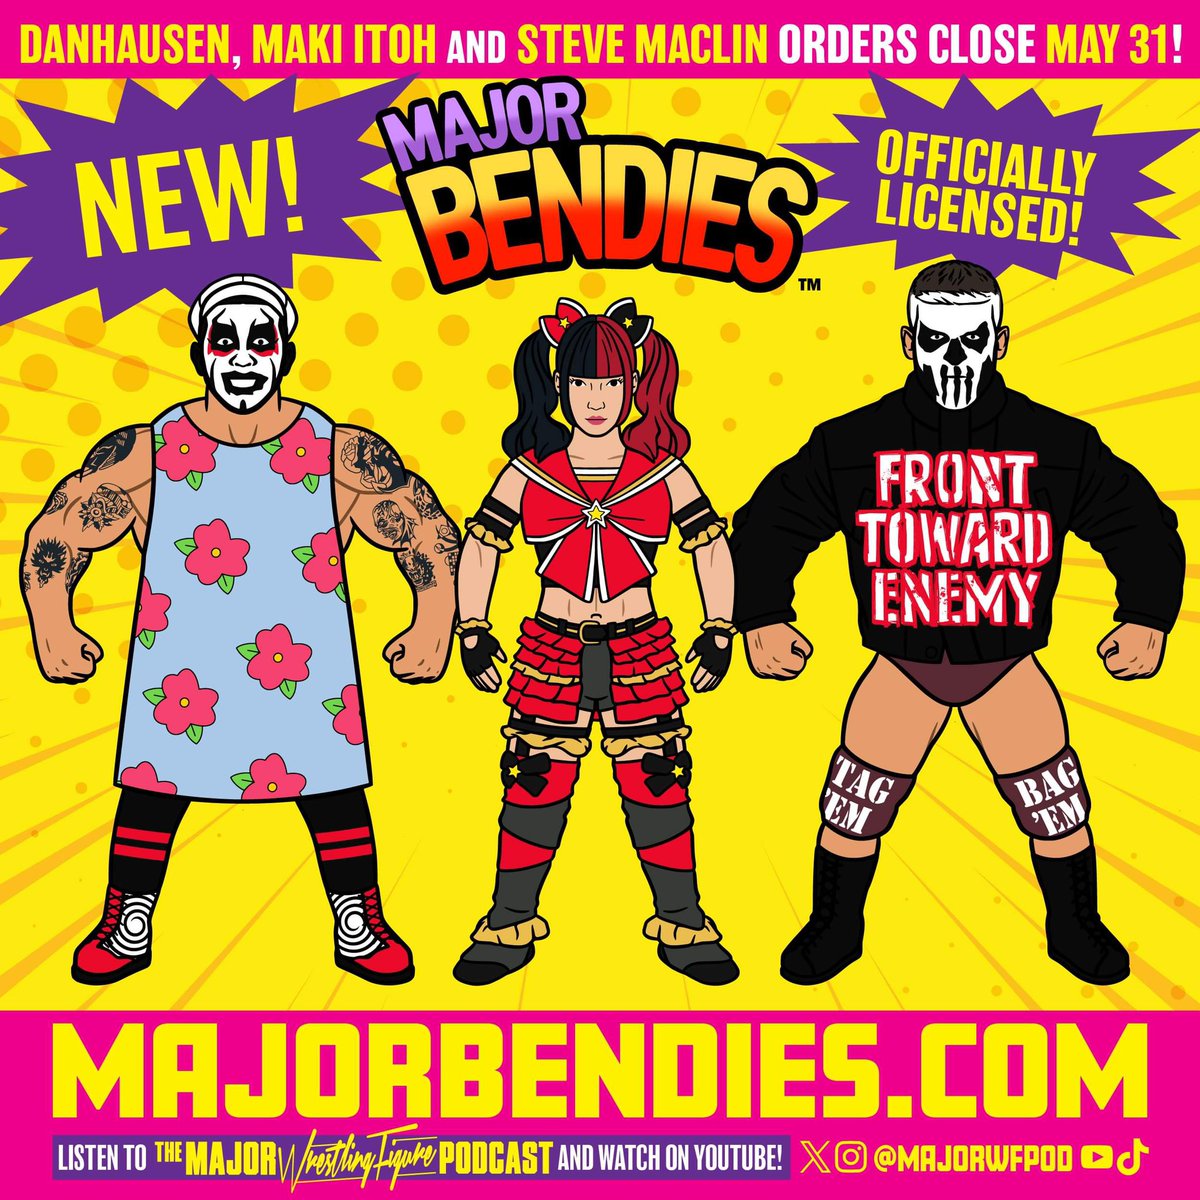 Do not miss your chance on purchasing our latest set of #MajorBendies! @DanhausenAD, @maki_itoh, and @SteveMaclin are only available to pre-order for the month of May at MajorBendies.com! #ScratchThatFigureItch